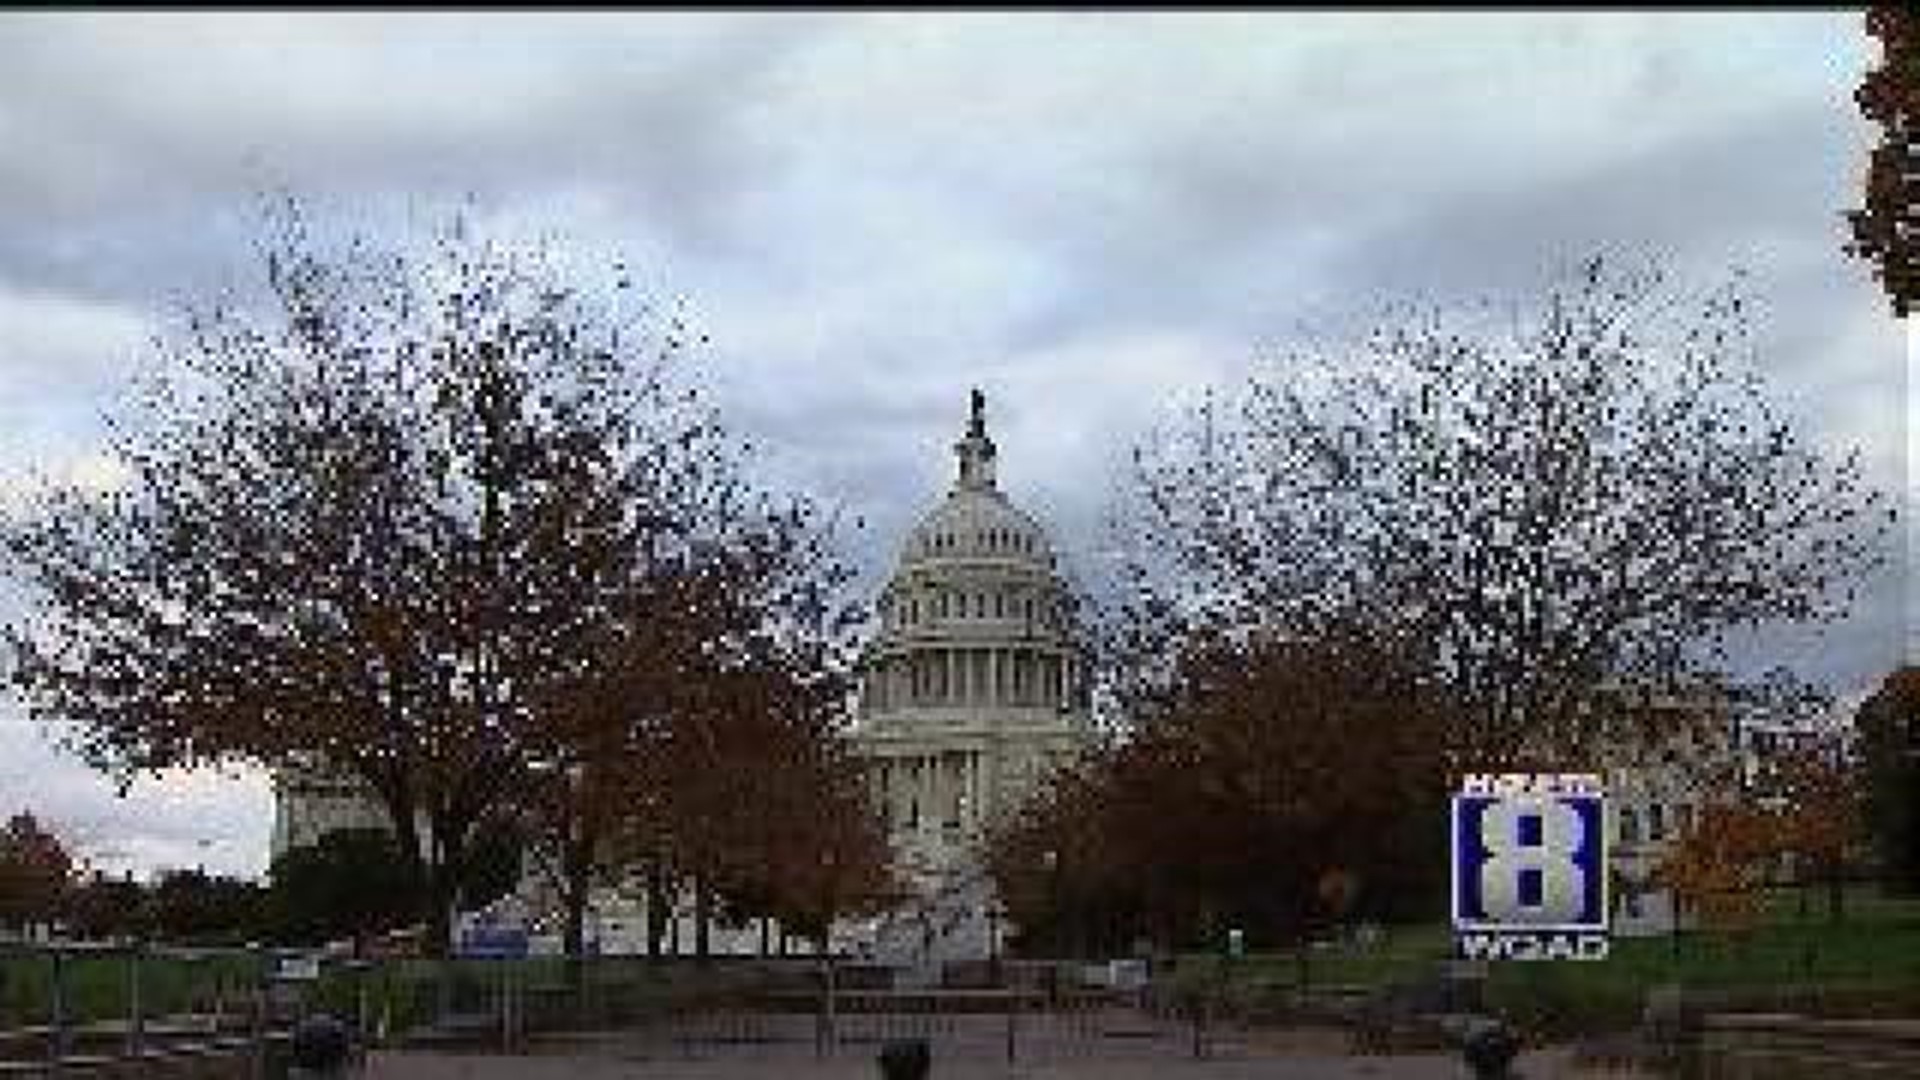 Most congressional lawmakers speak at high school level